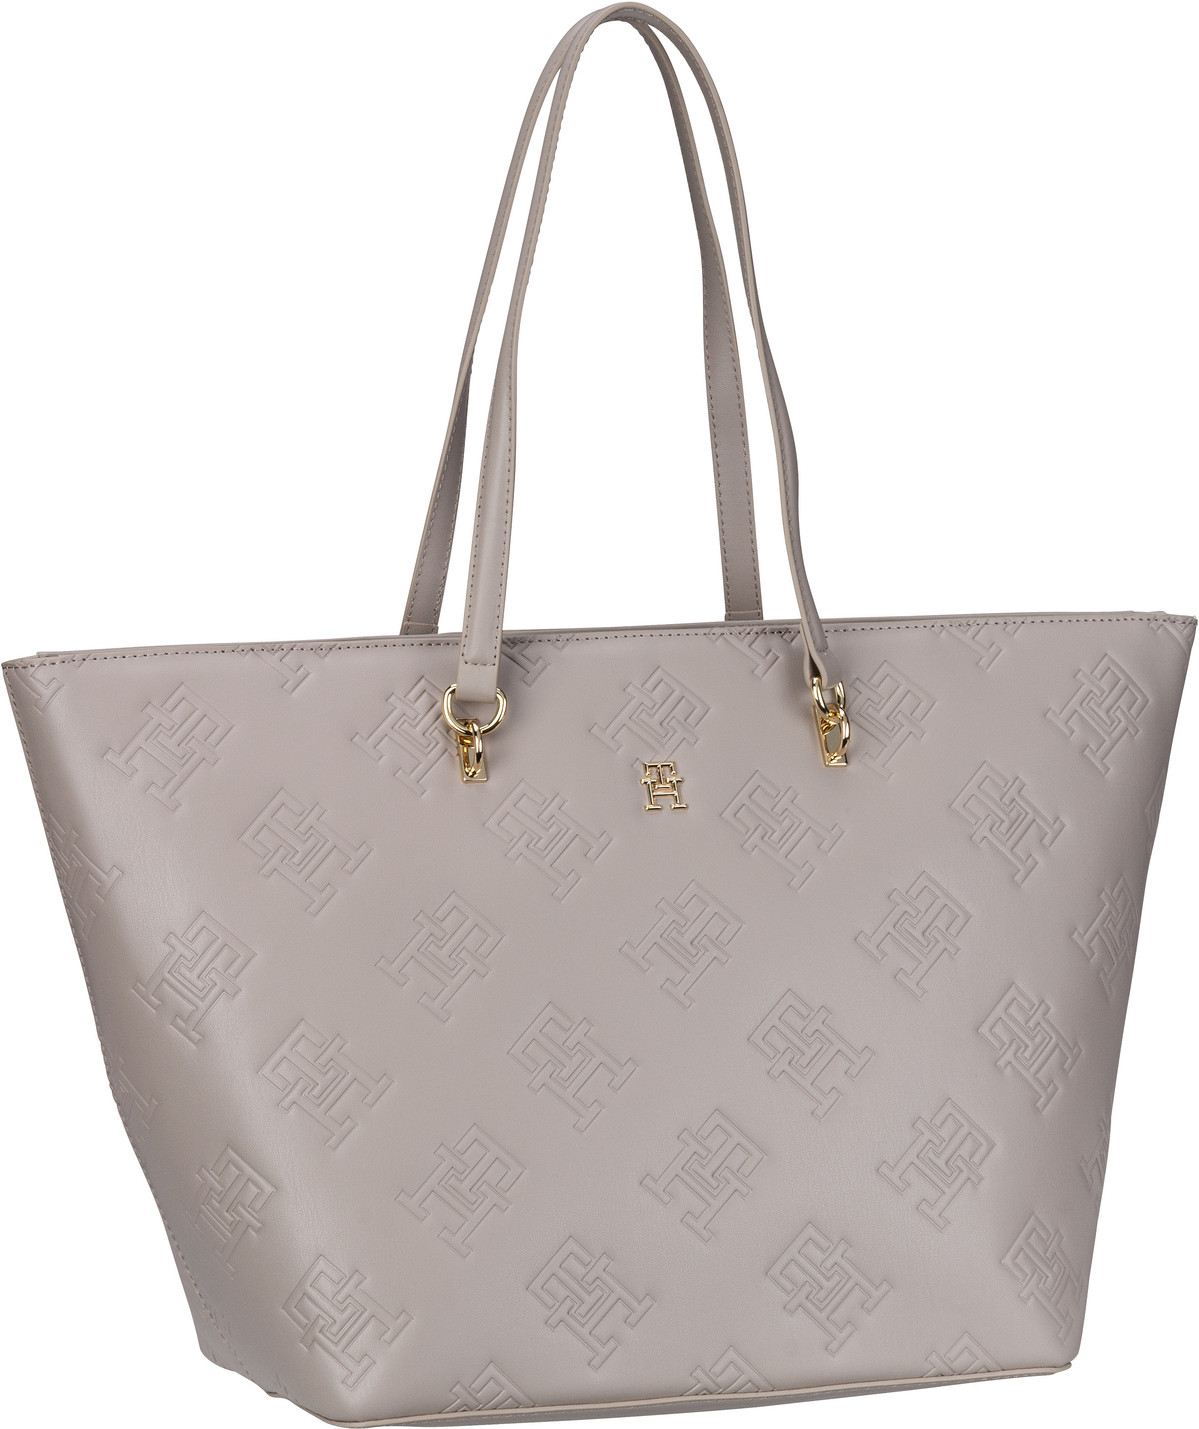 Tommy Hilfiger TH Refined Tote Mono PSP24  in Smooth Taupe (30 Liter), Shopper